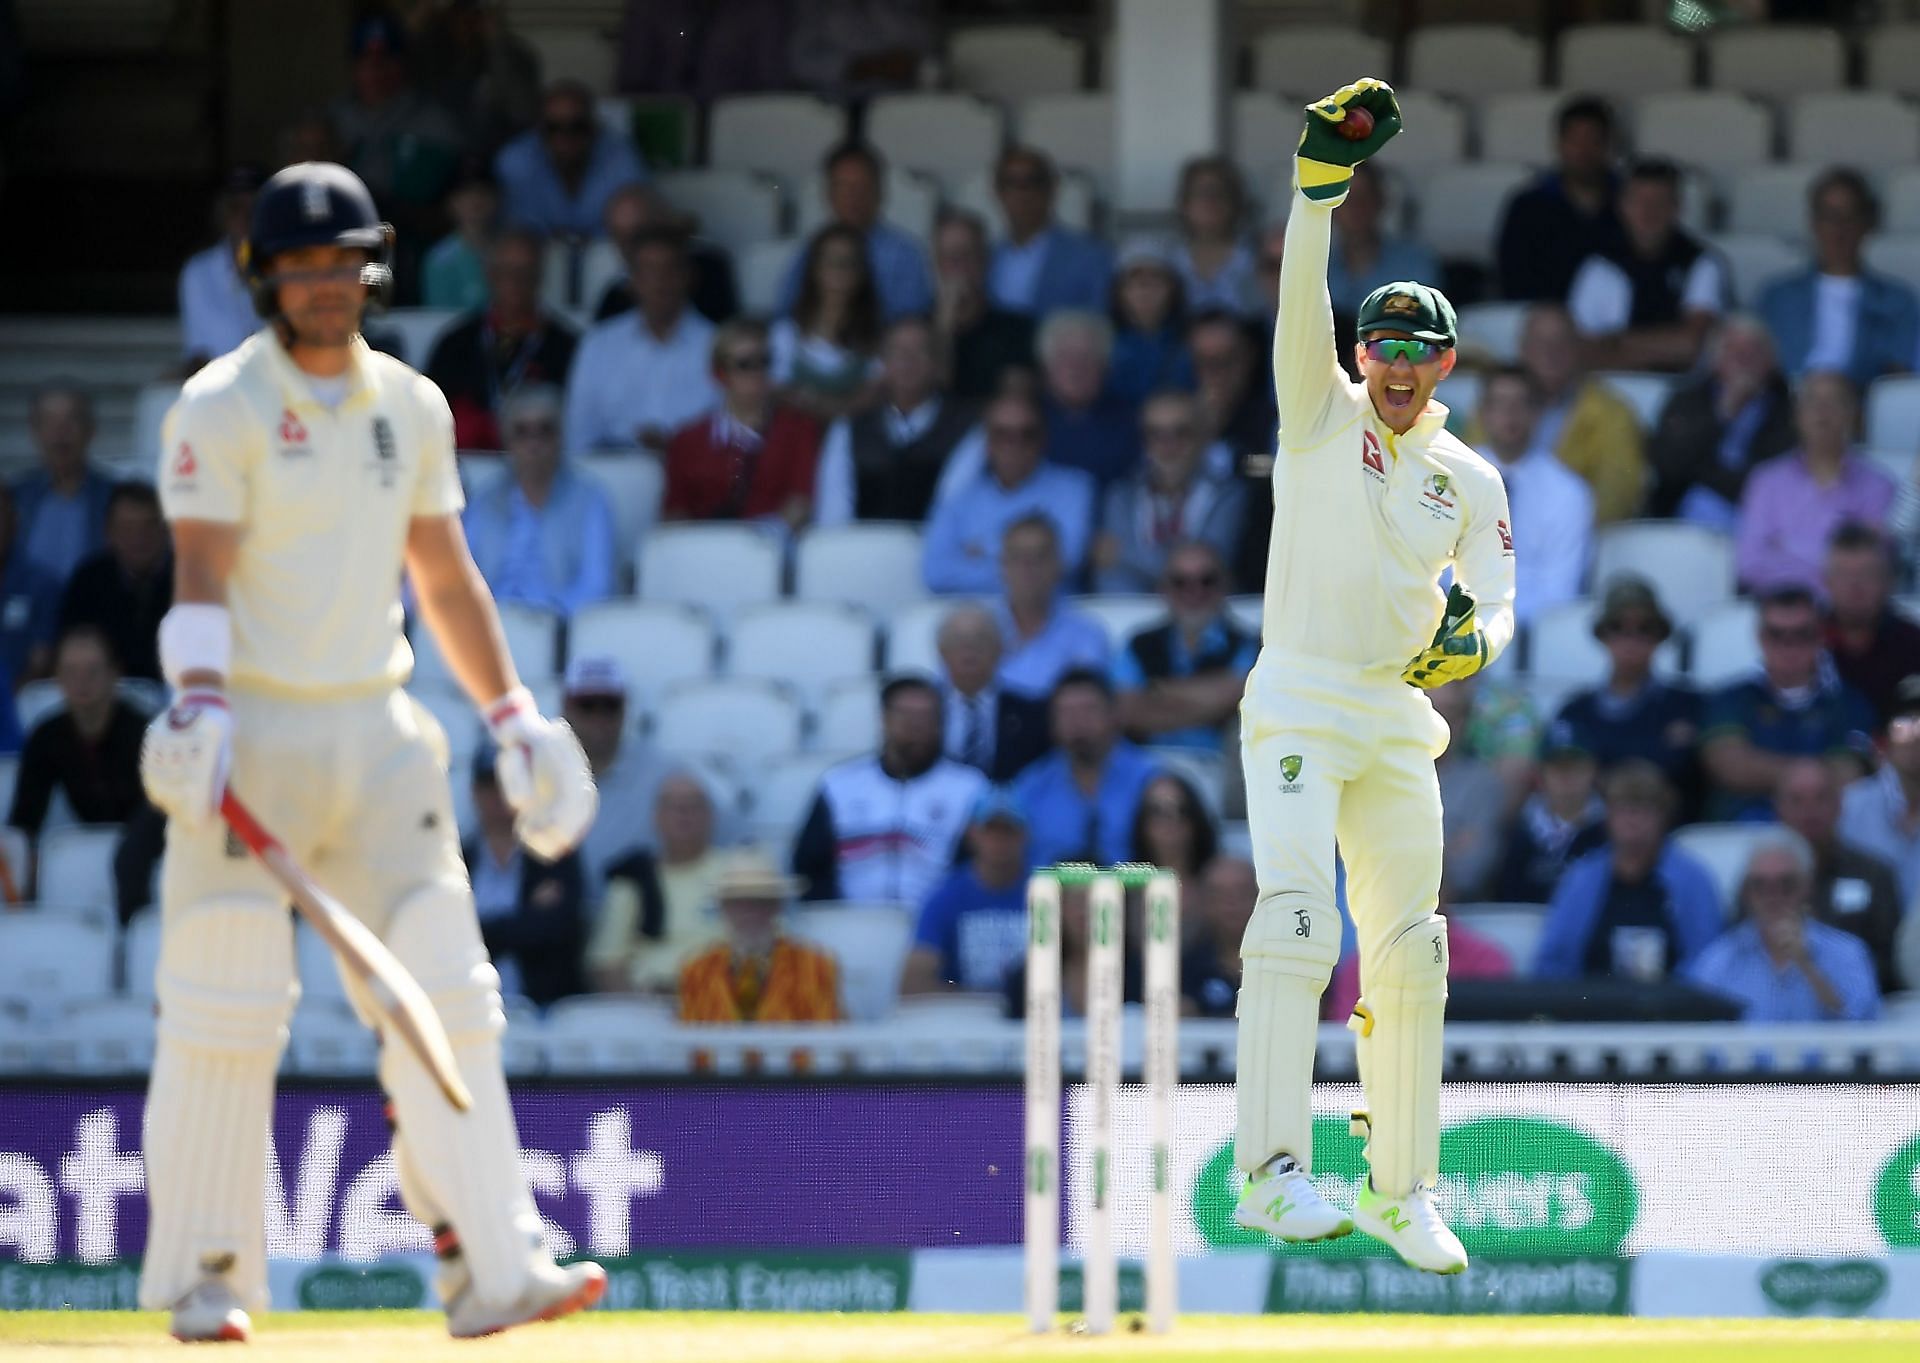 Tim Paine appeals during Ashes 2019. Pic: Getty Images